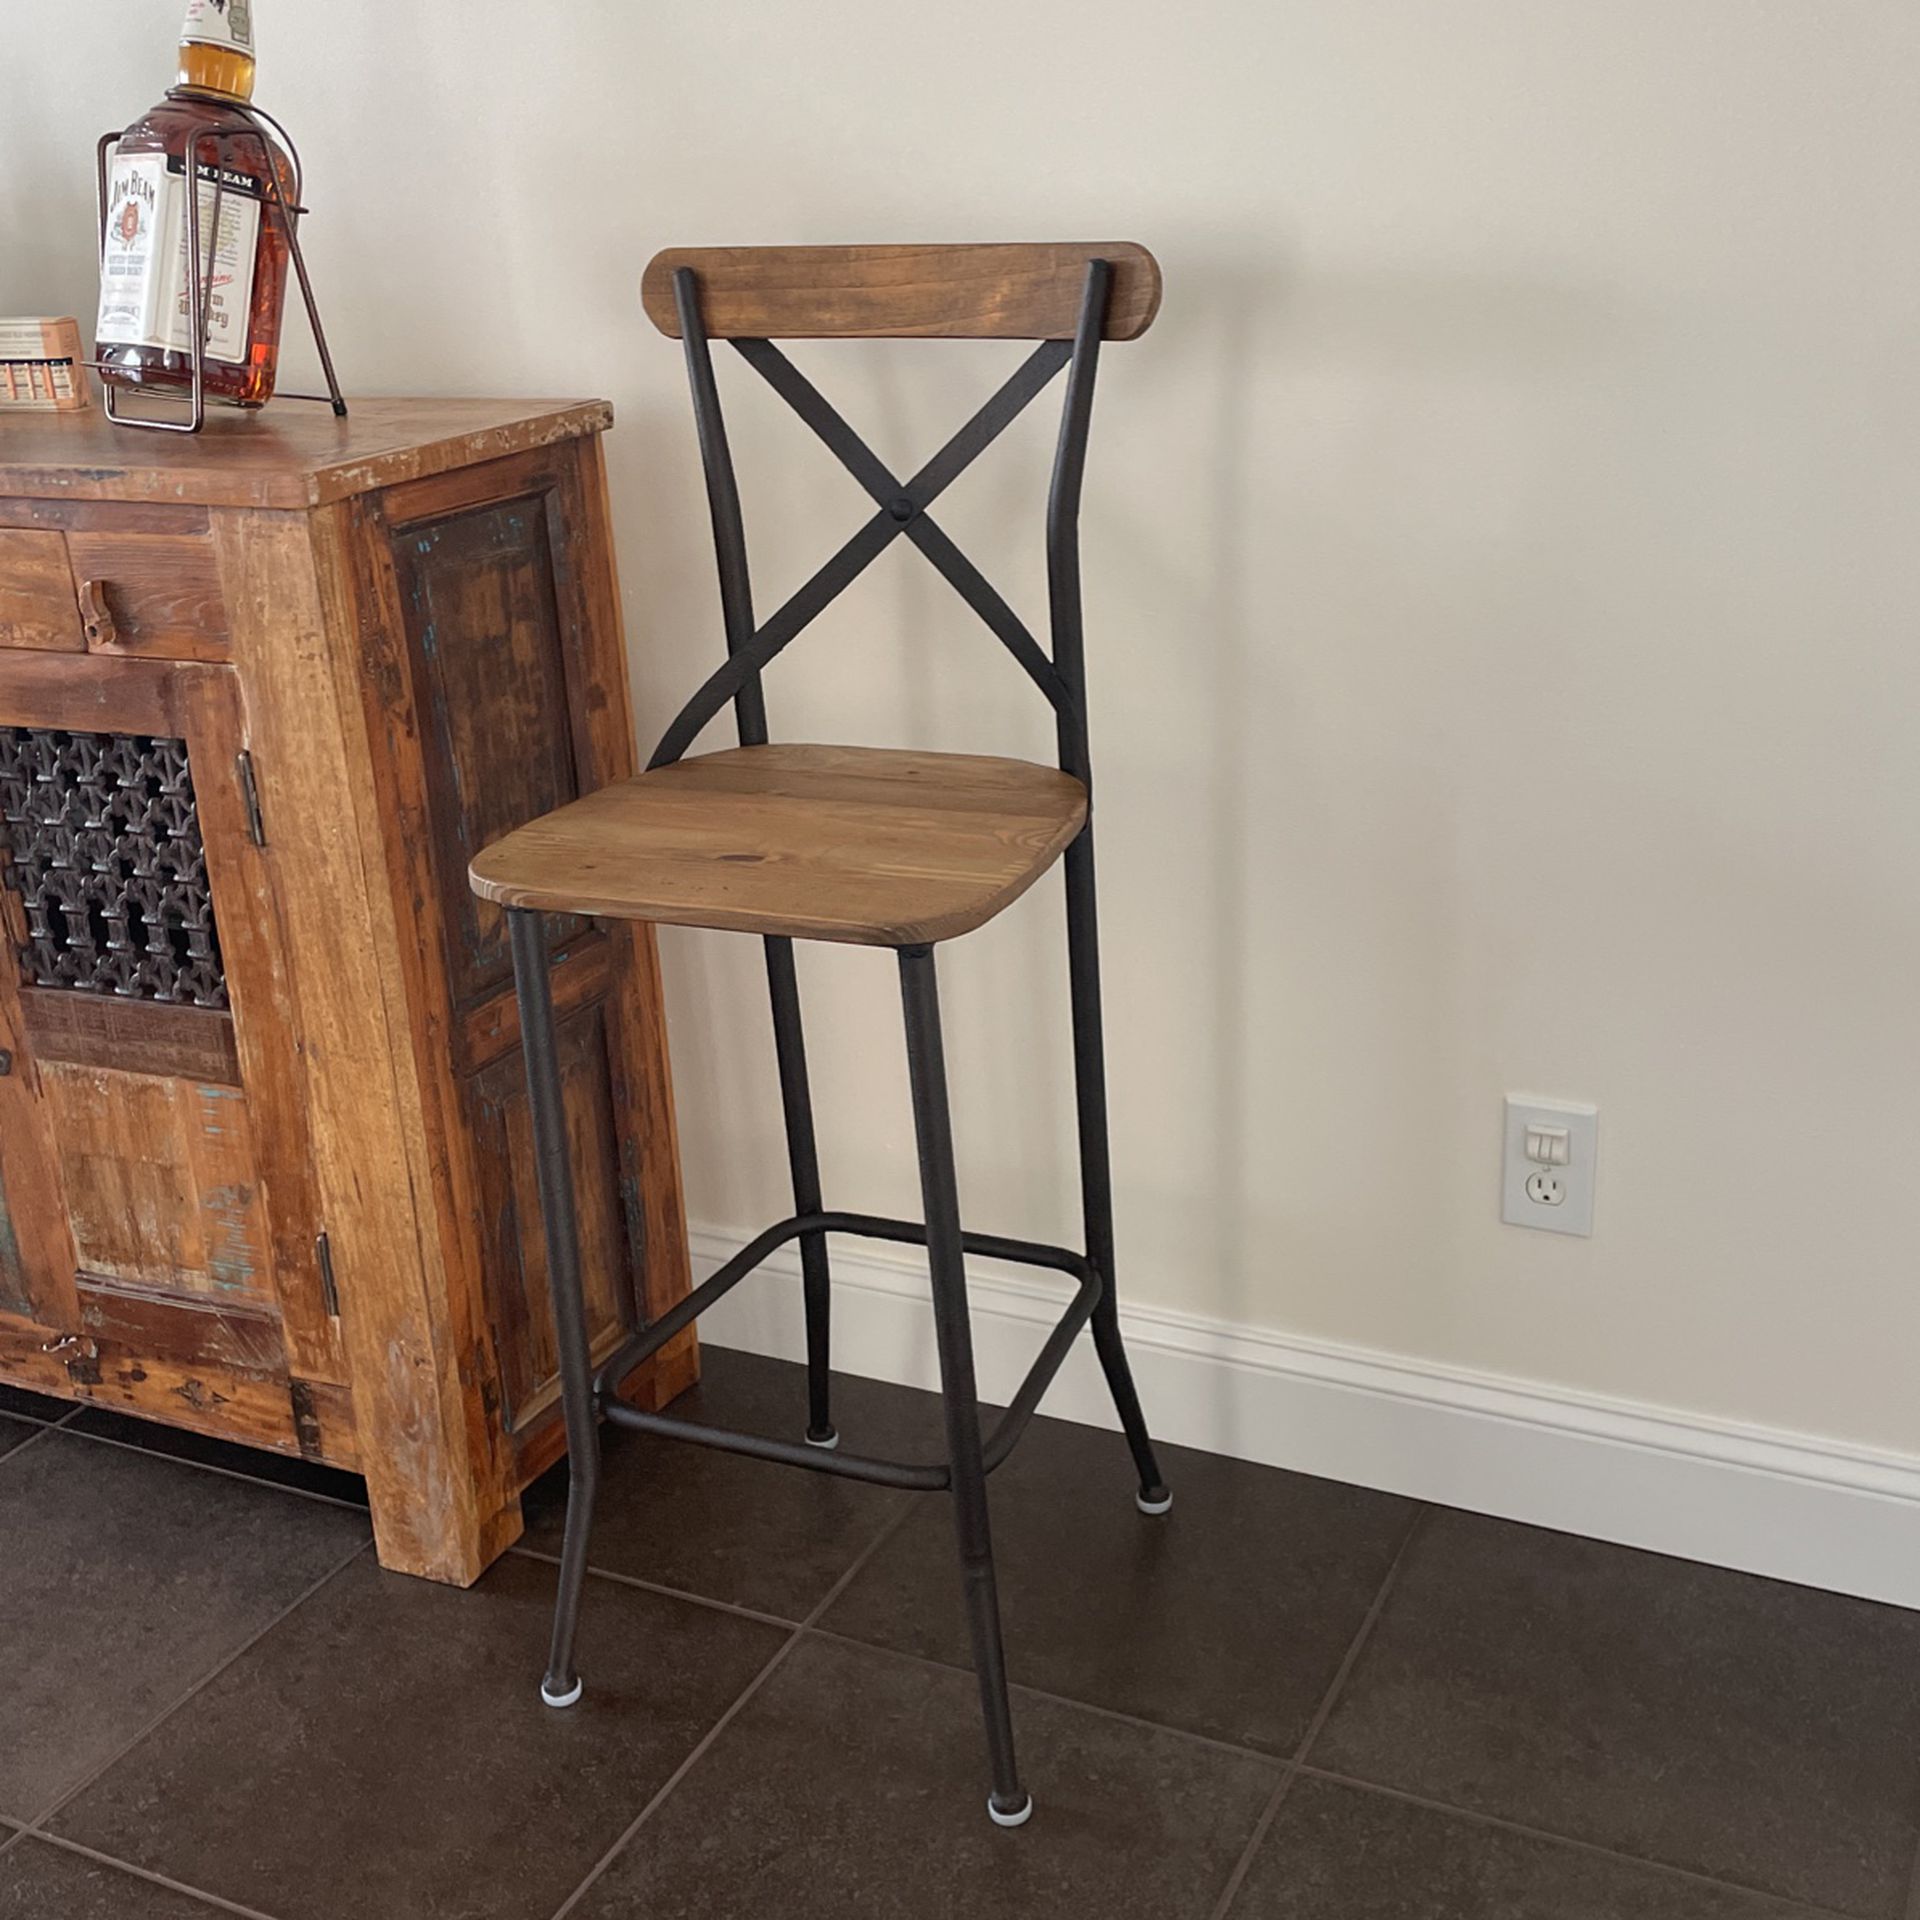 Reclaimed, Wood, And Iron Bar Stool